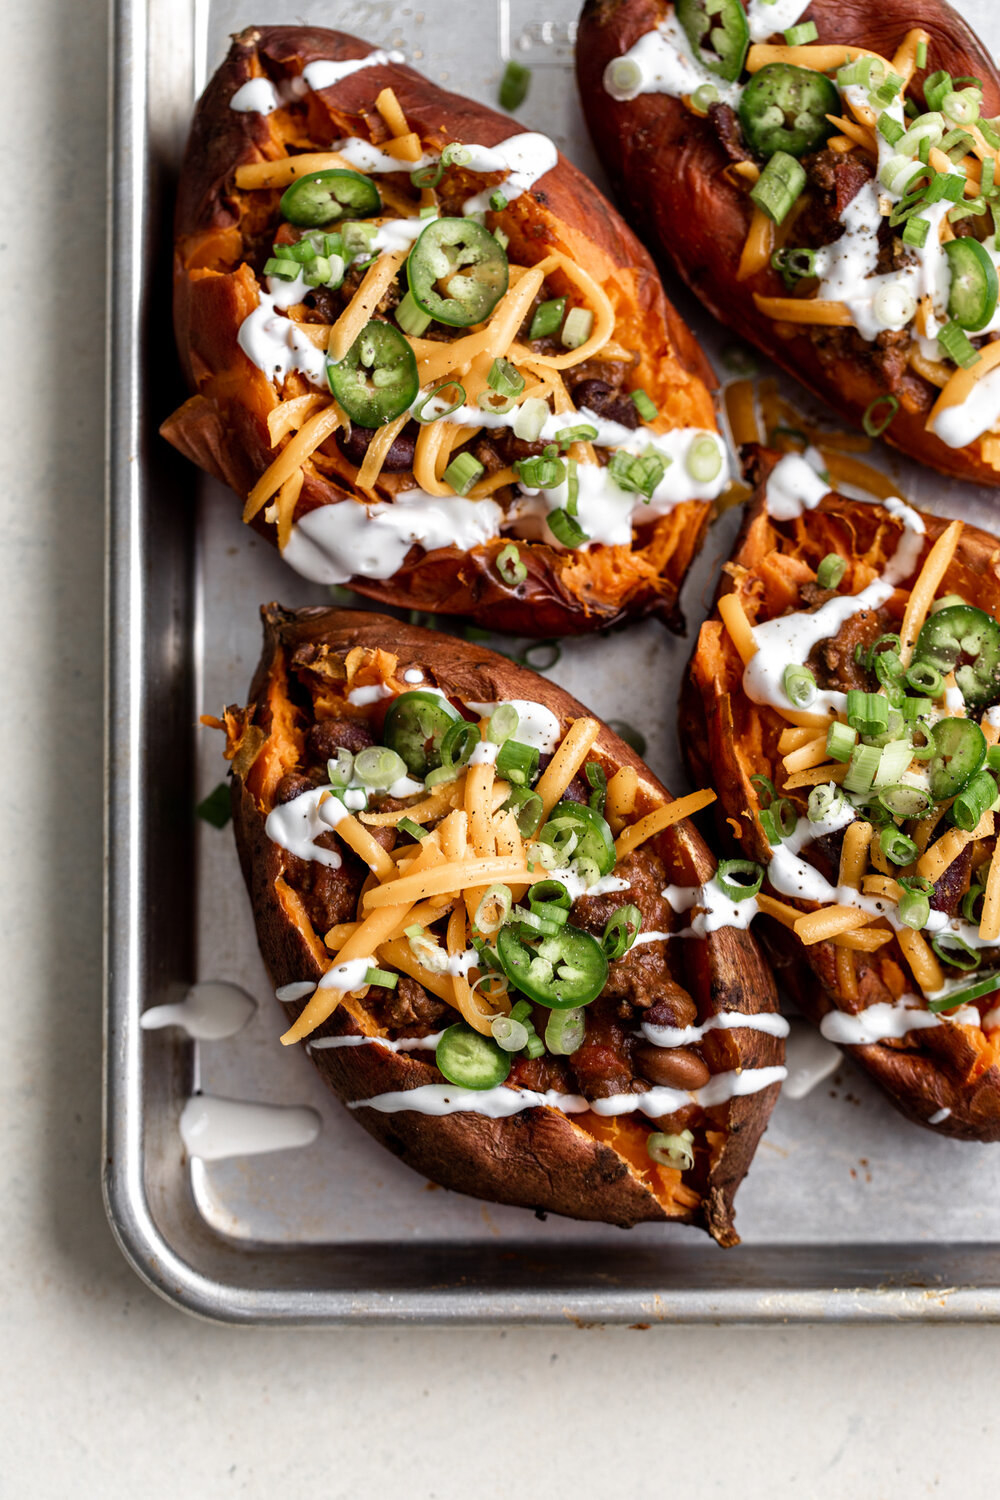 Baked potatoes topped with chili, jalapeño, and cheese.